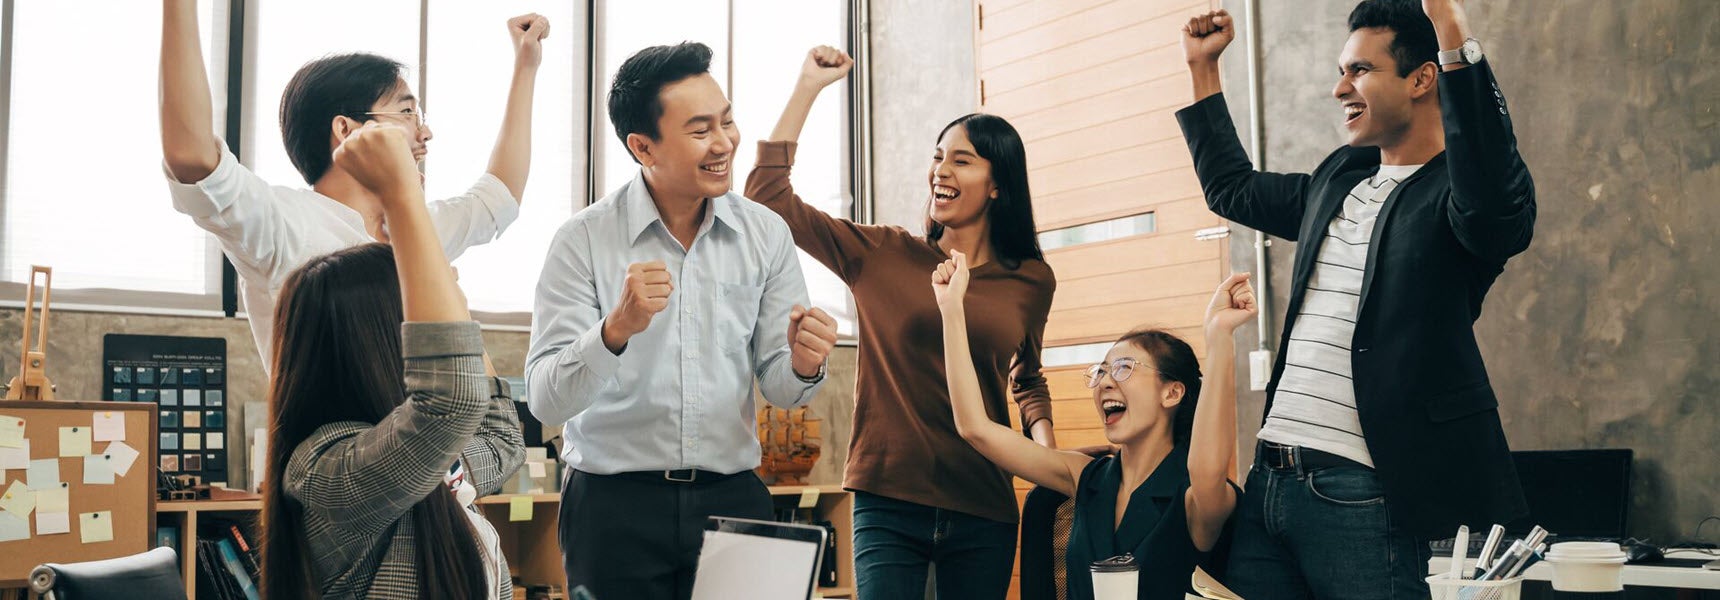 Smiling employees in an office raise their arms in celebration.